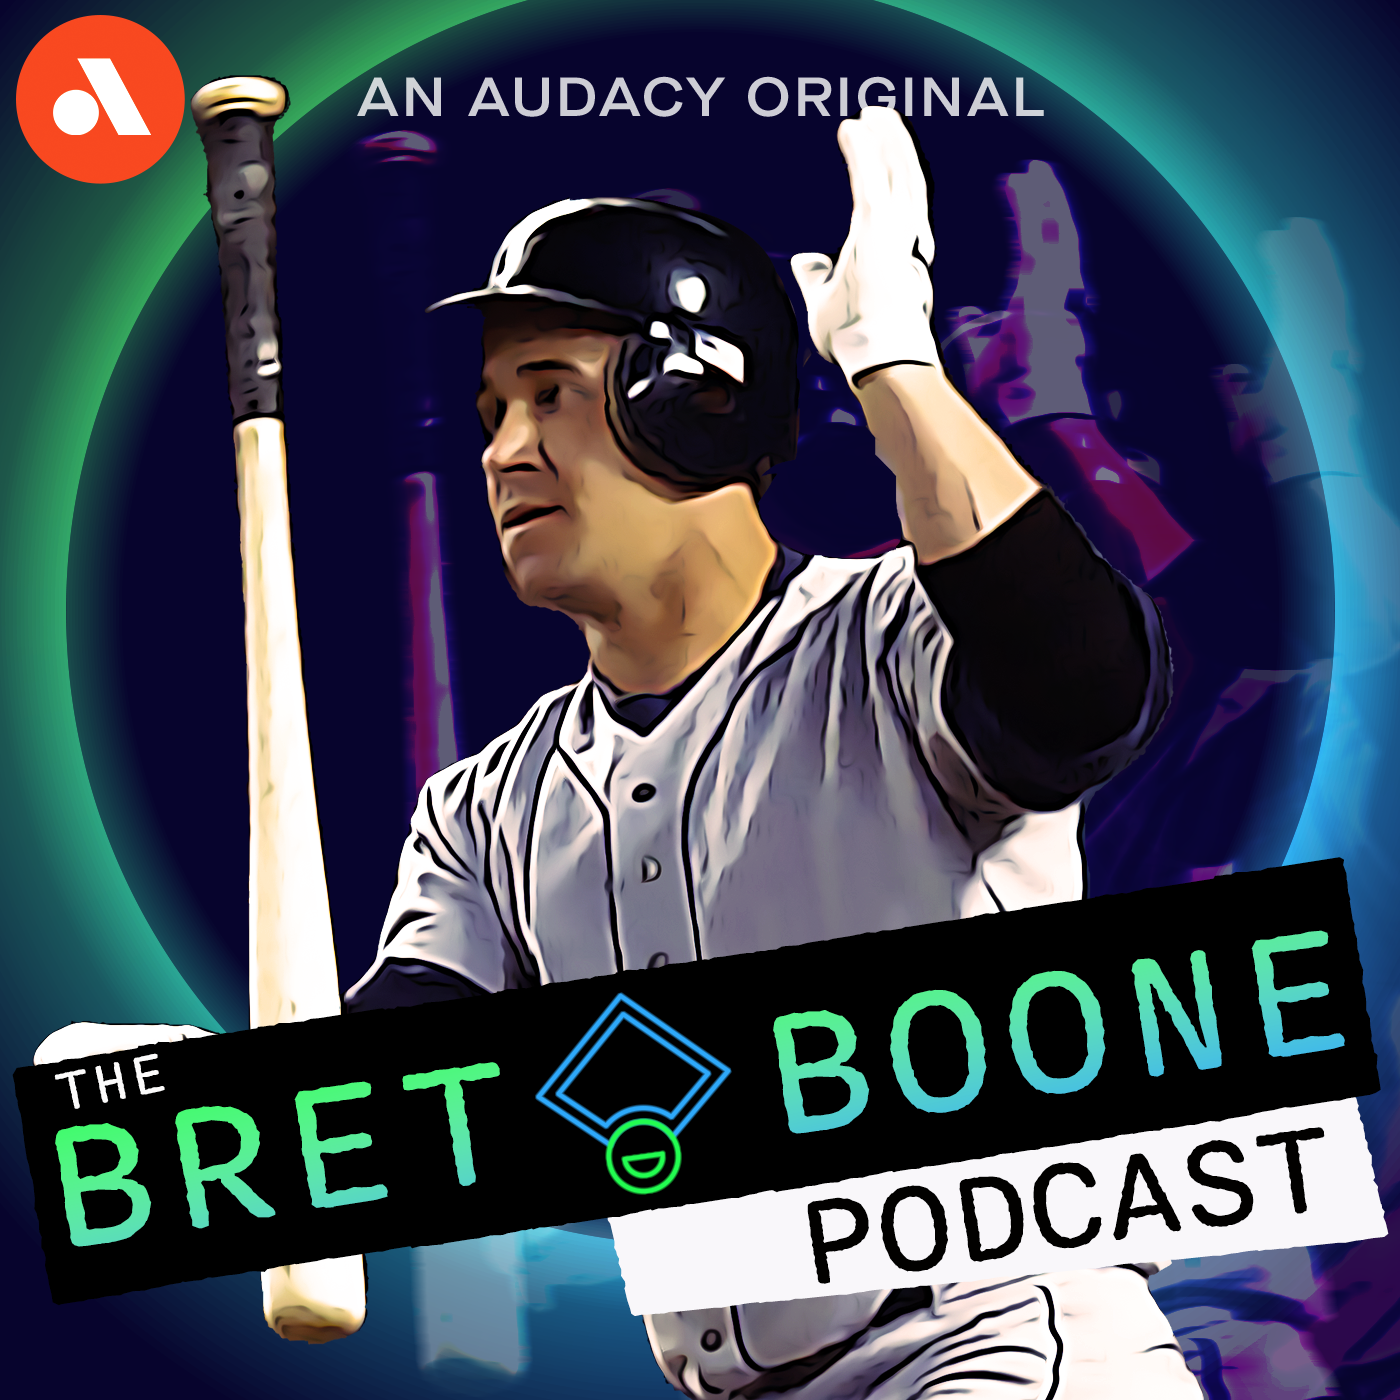 Field of Dreams Game Coming: Giants vs. Cardinals | 'The Bret Boone Podcast'